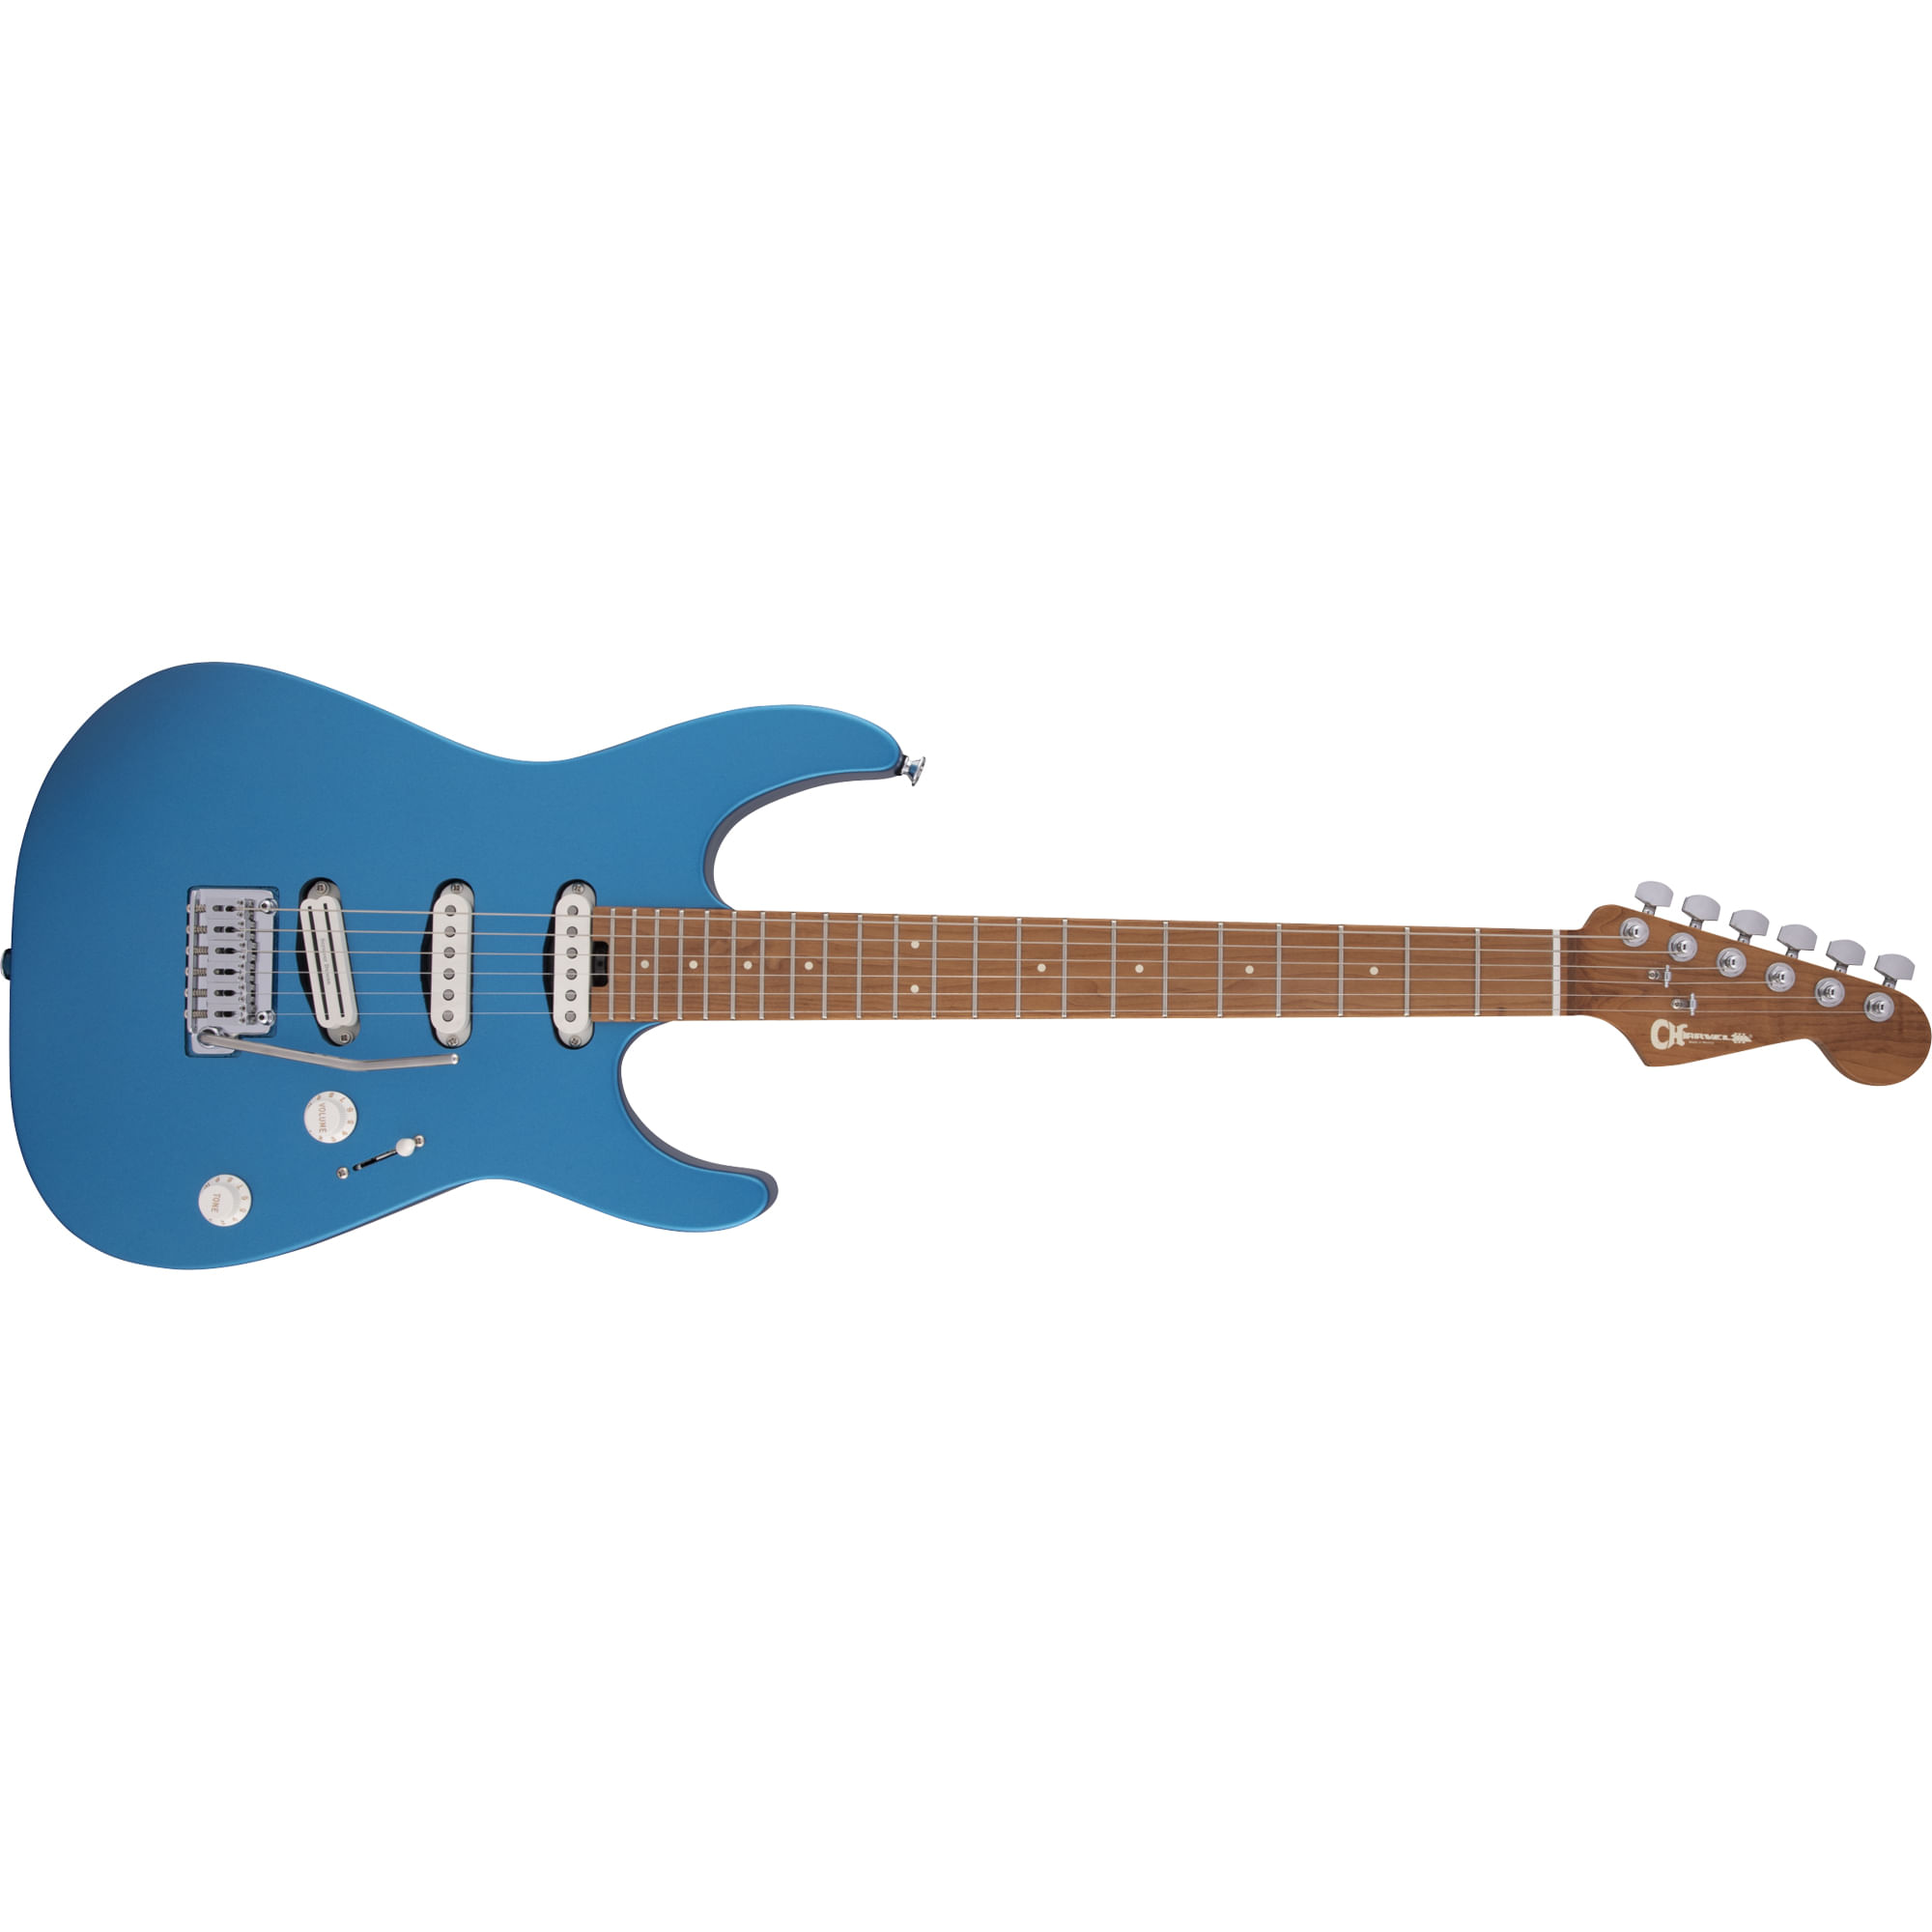 Cosmo　Electric　Blue　Charvel　Electric　Guitar　SSS　DK22　Pro-Mod　Music